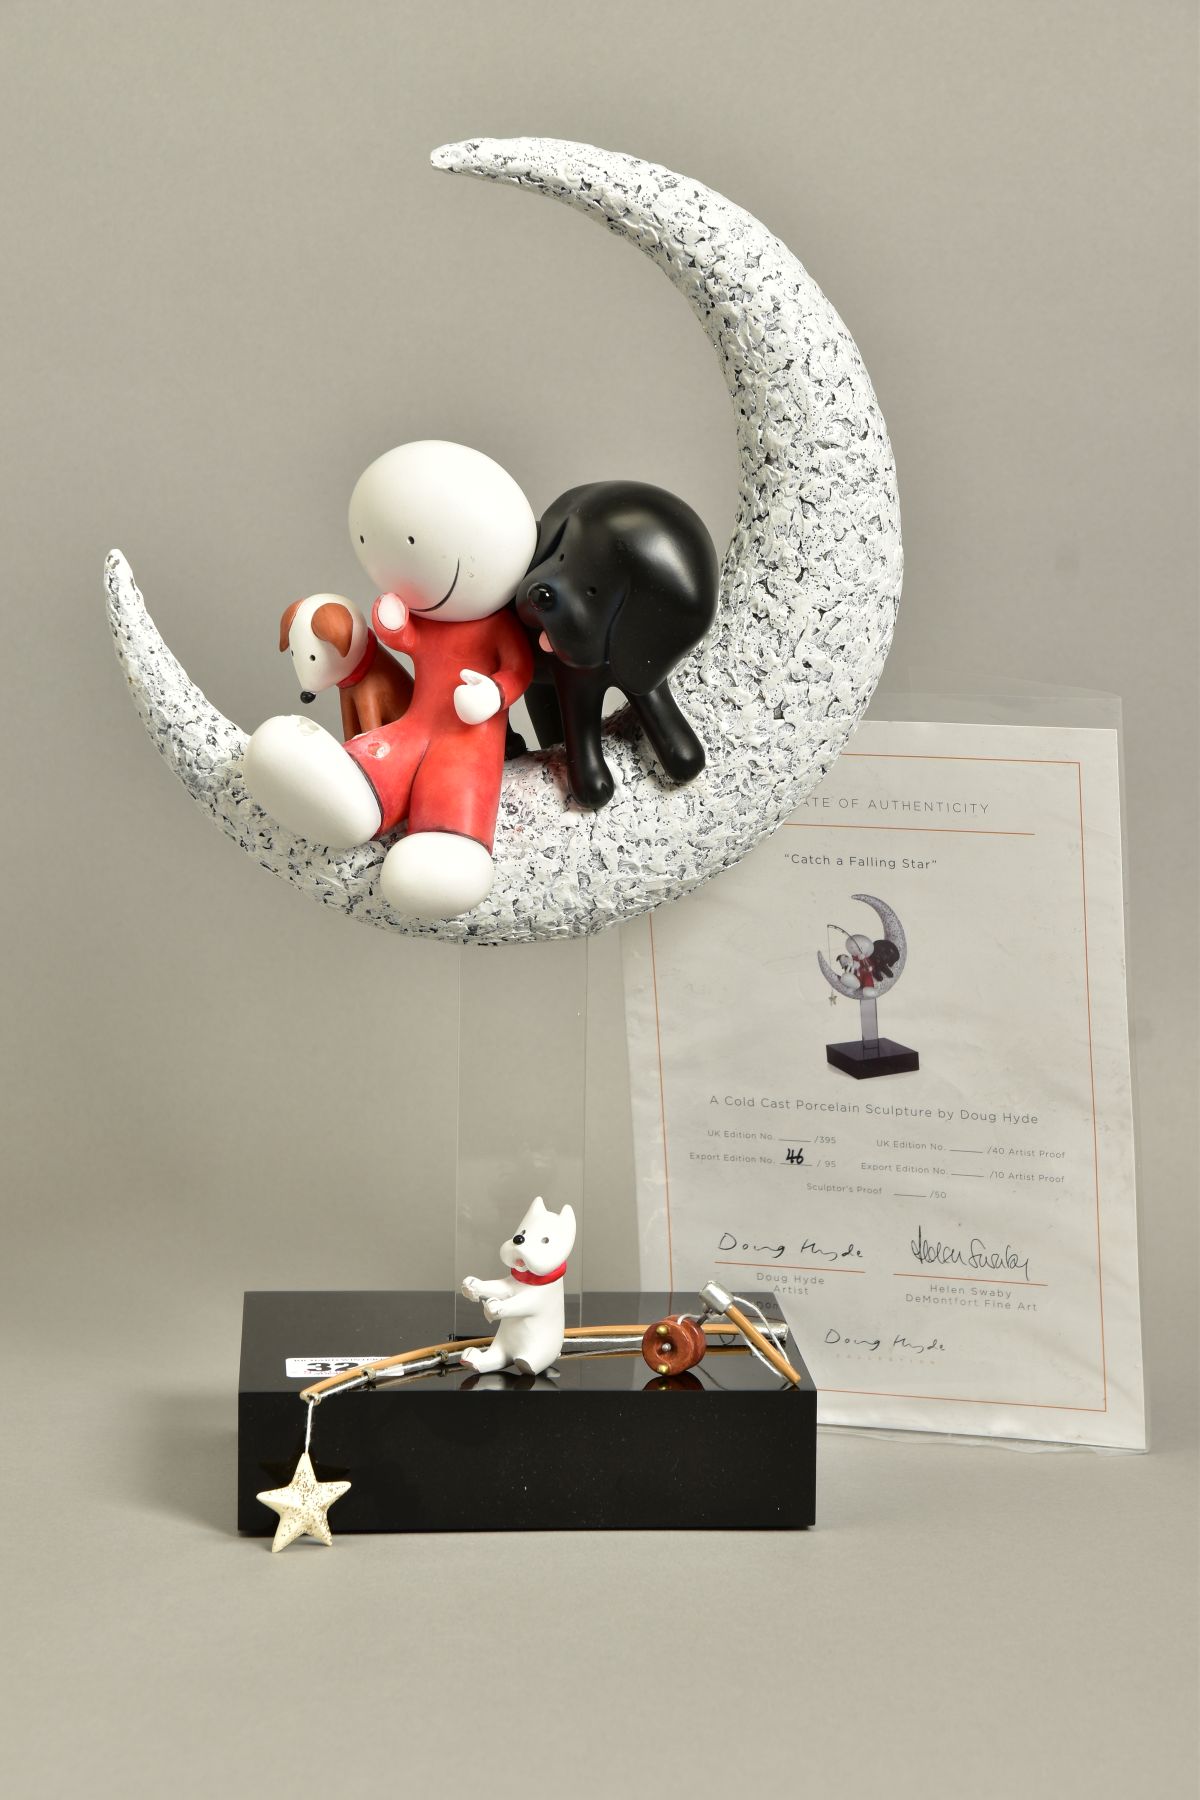 DOUG HYDE (BRITISH 1972) 'CATCH A FALLING STAR', an export edition sculpture of a boy and dog 46/